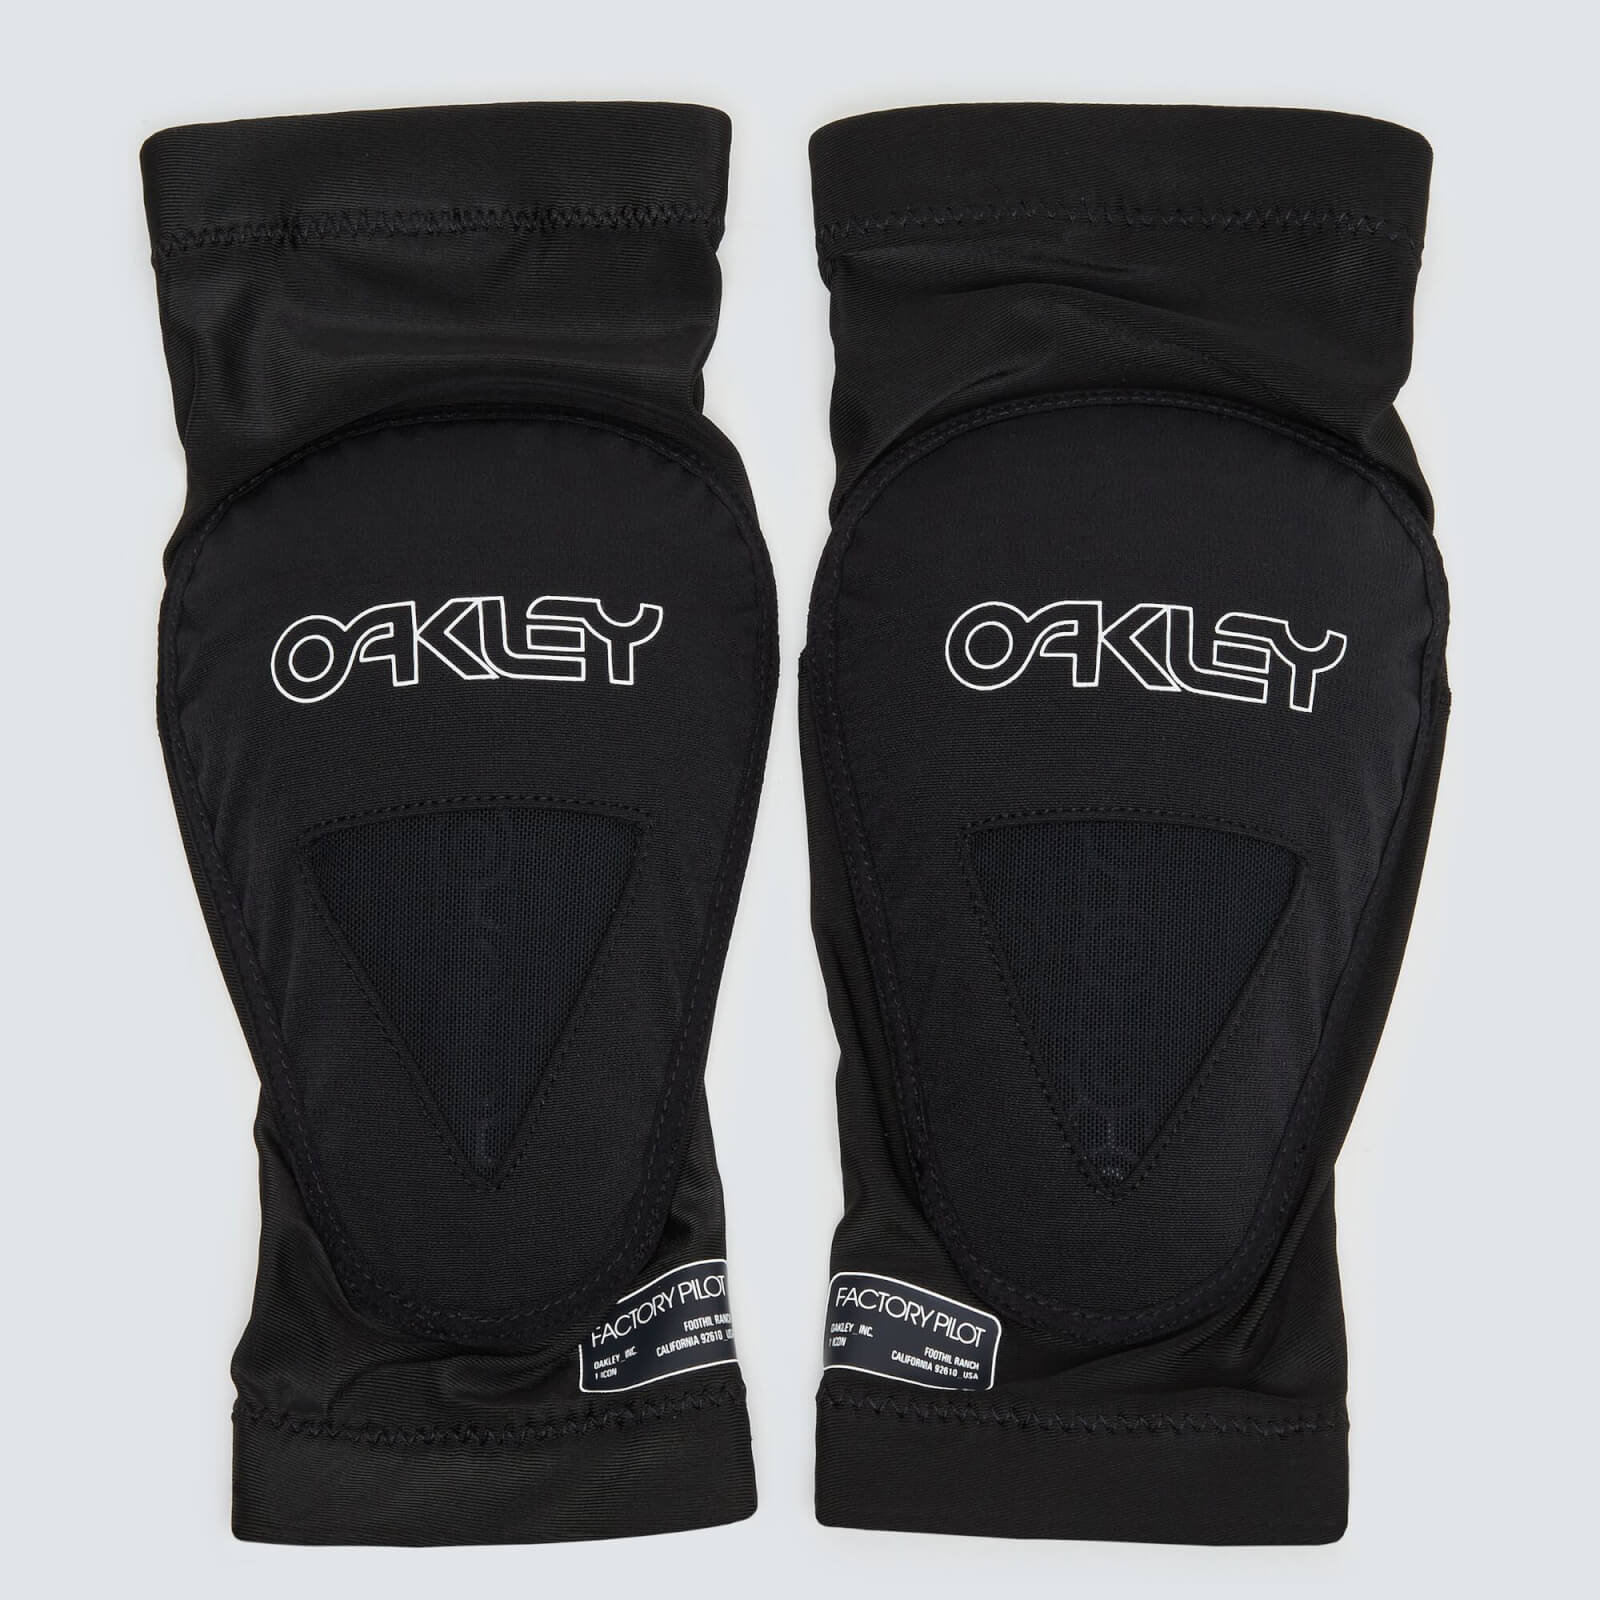 Oakley All Mountain RZ-Labs Elbow Guards - L/XL